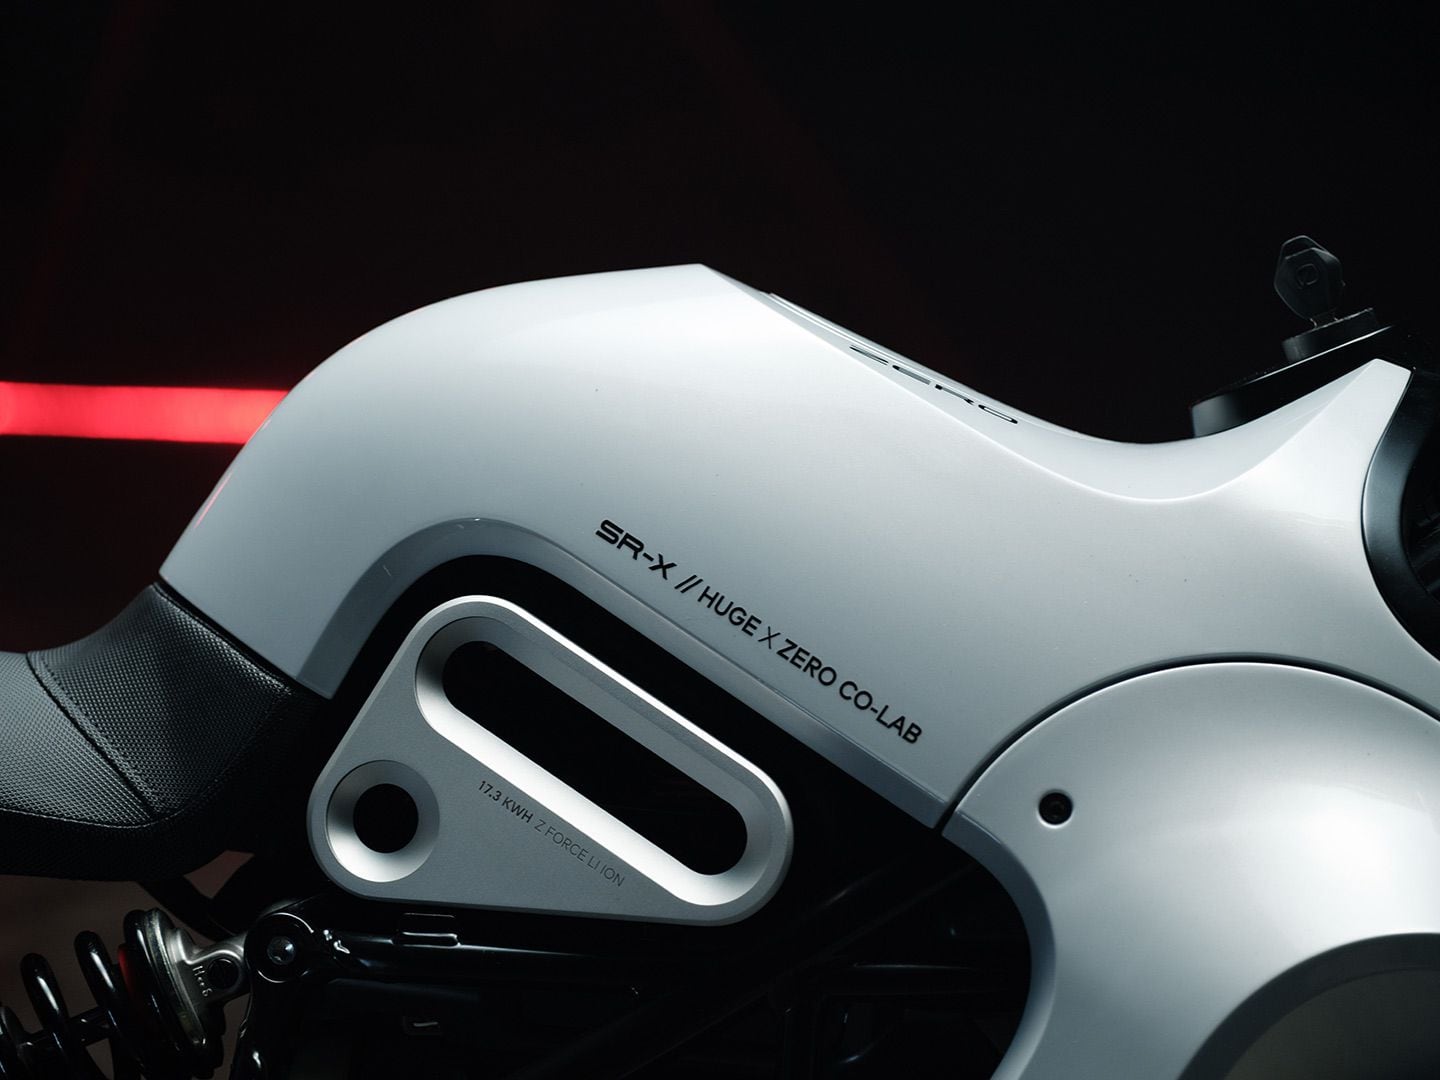 Text on the SR-X’s “fuel tank” section indicates the parties involved in the concept, and below that there’s text calling out what is powering this electric motorcycle.